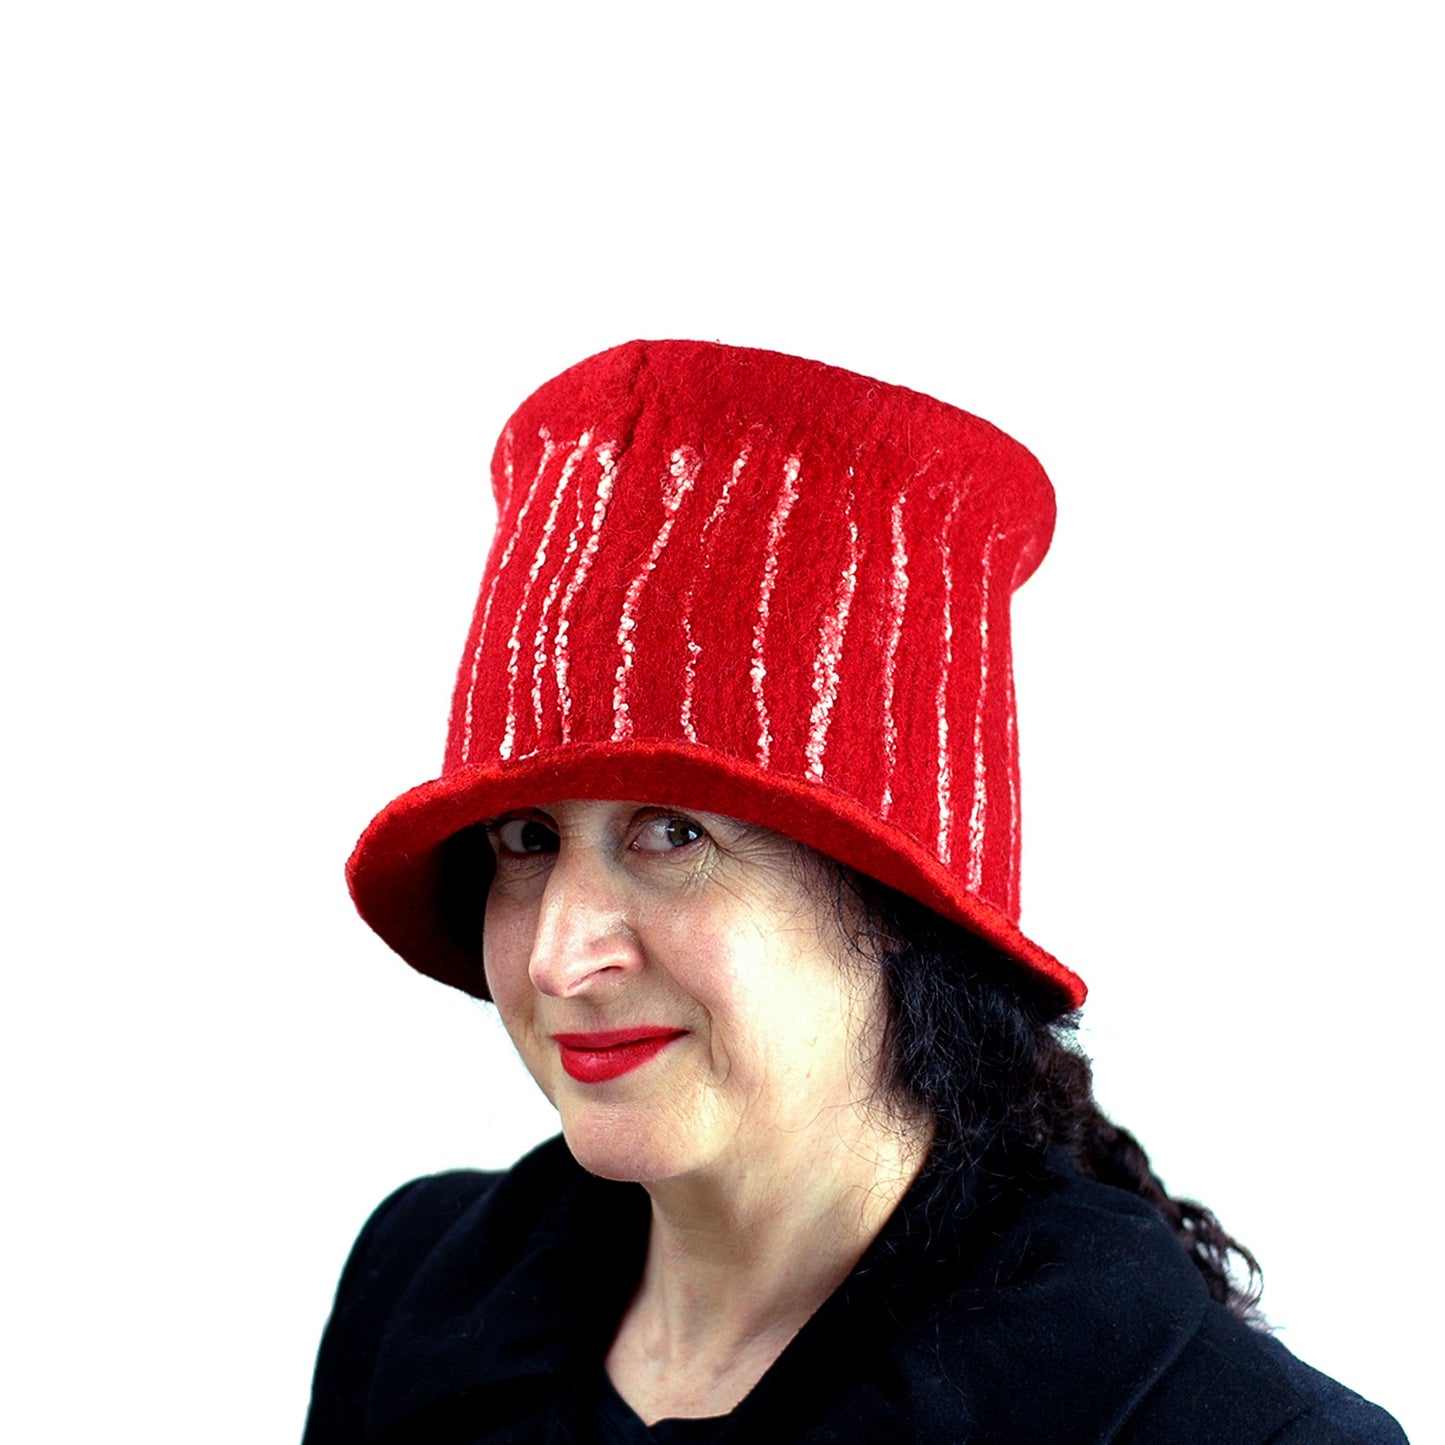 Red Top Hat with White Stripes - three quarters view